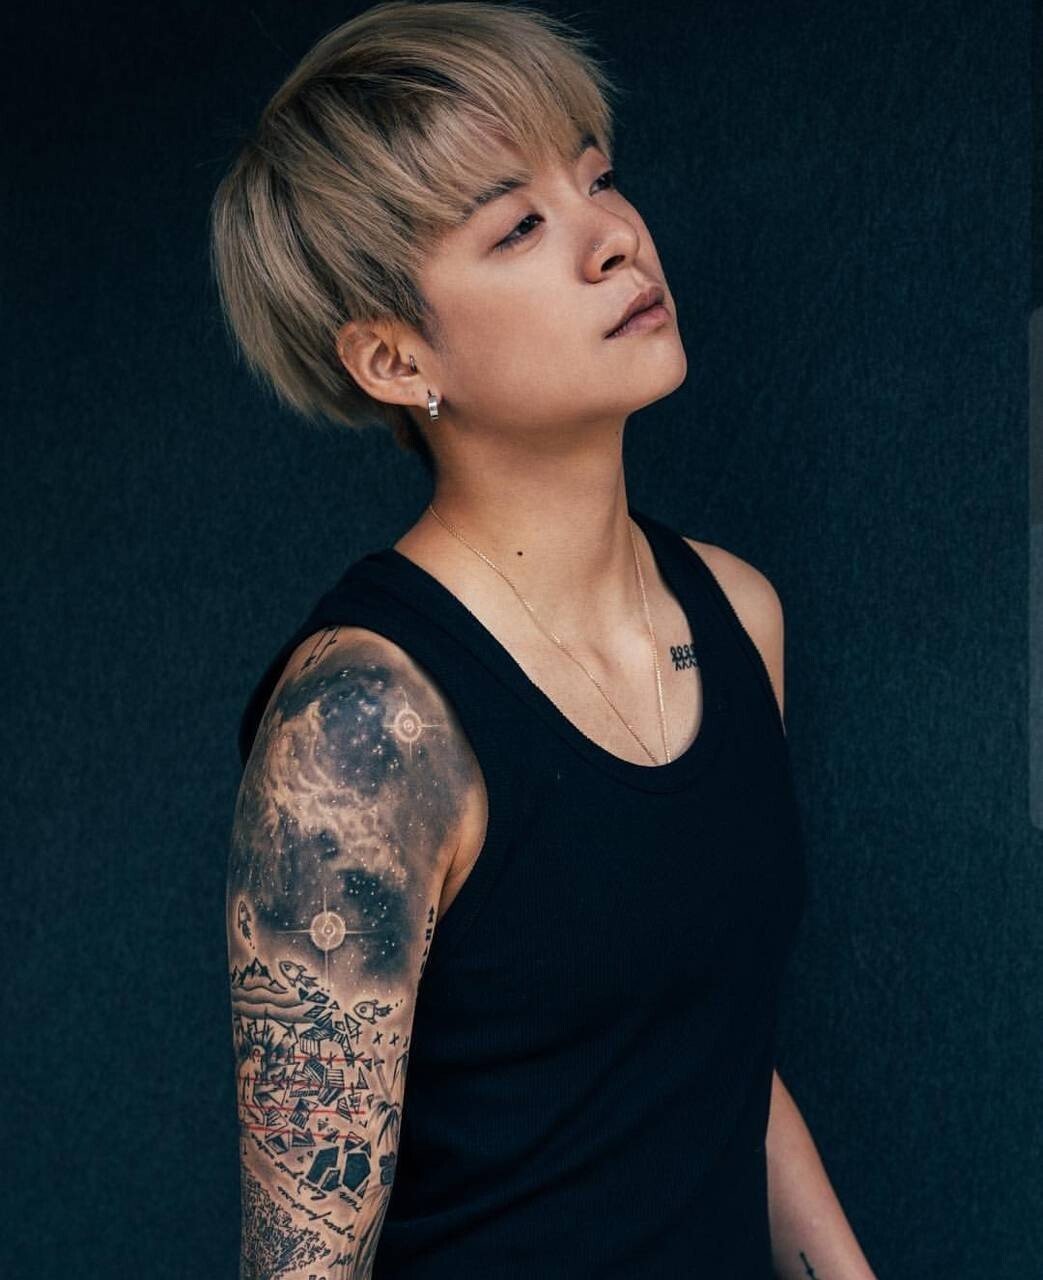 Amber made her debut as a solo artist in 2015.